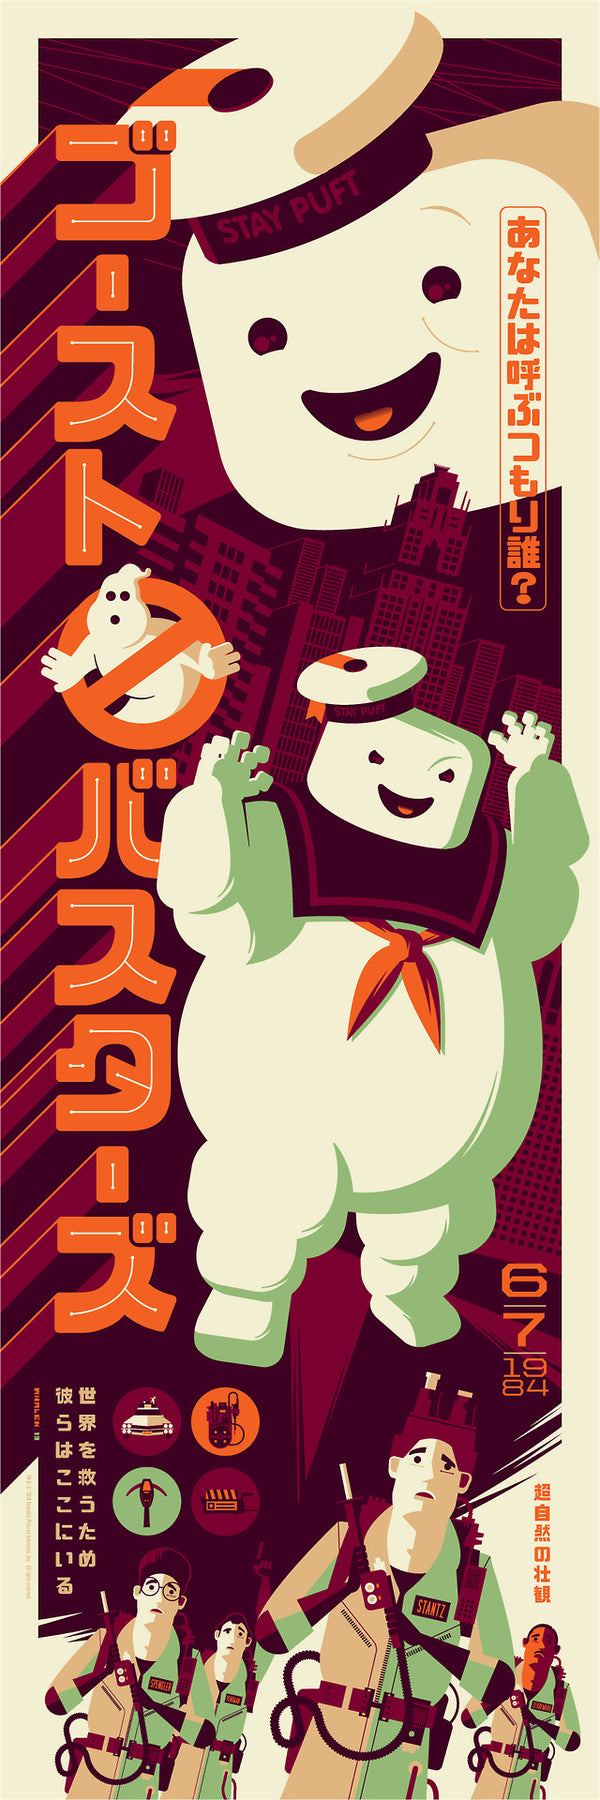 Ghostbusters (Confectionary Kaiju) by Tom Whalen, 12" x 36" Screen Print